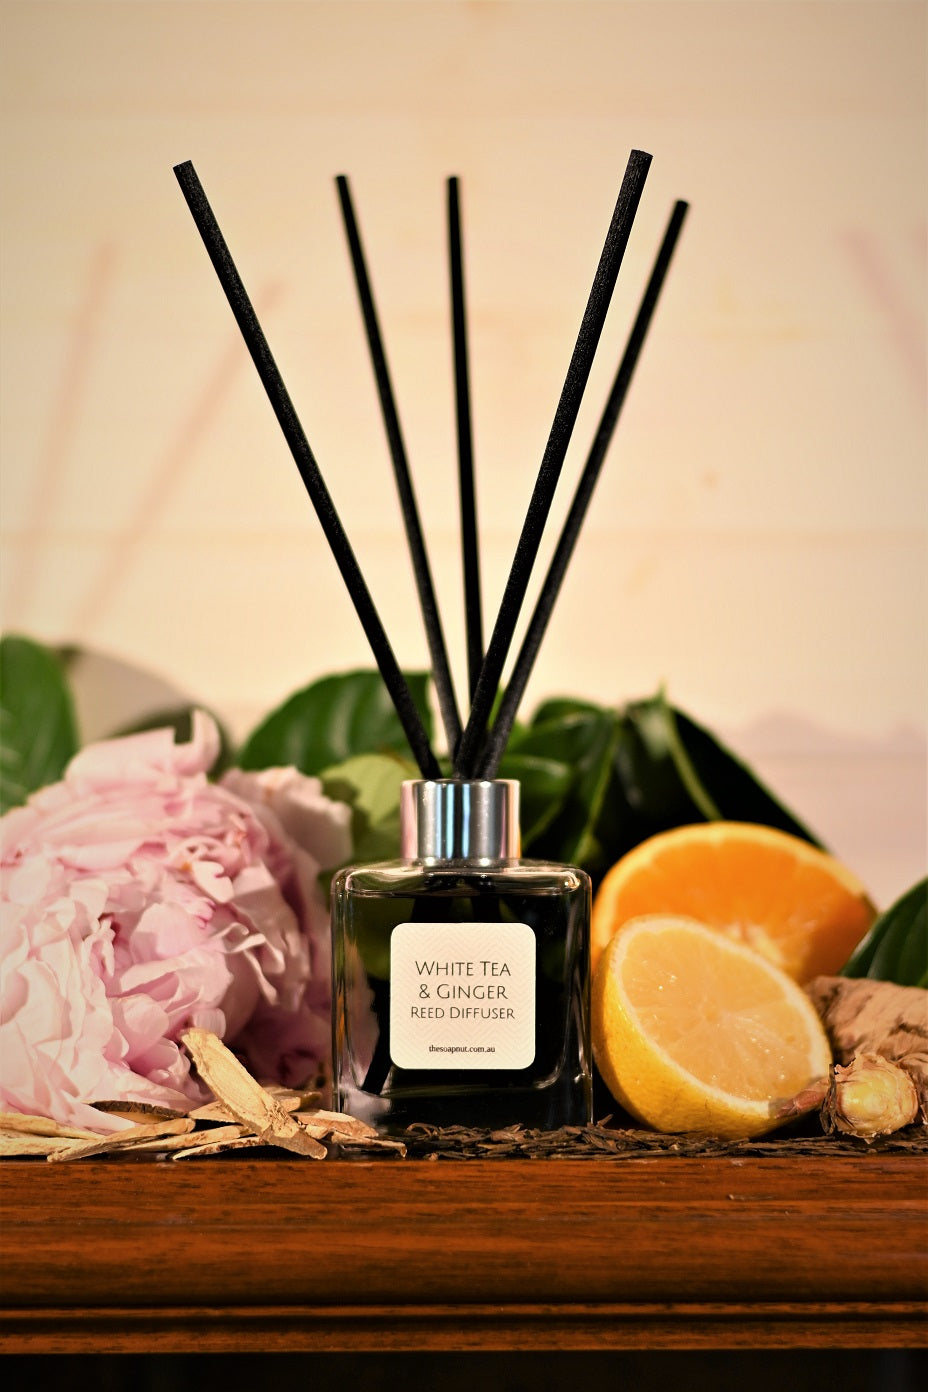 White Tea & Ginger Reed Diffuser